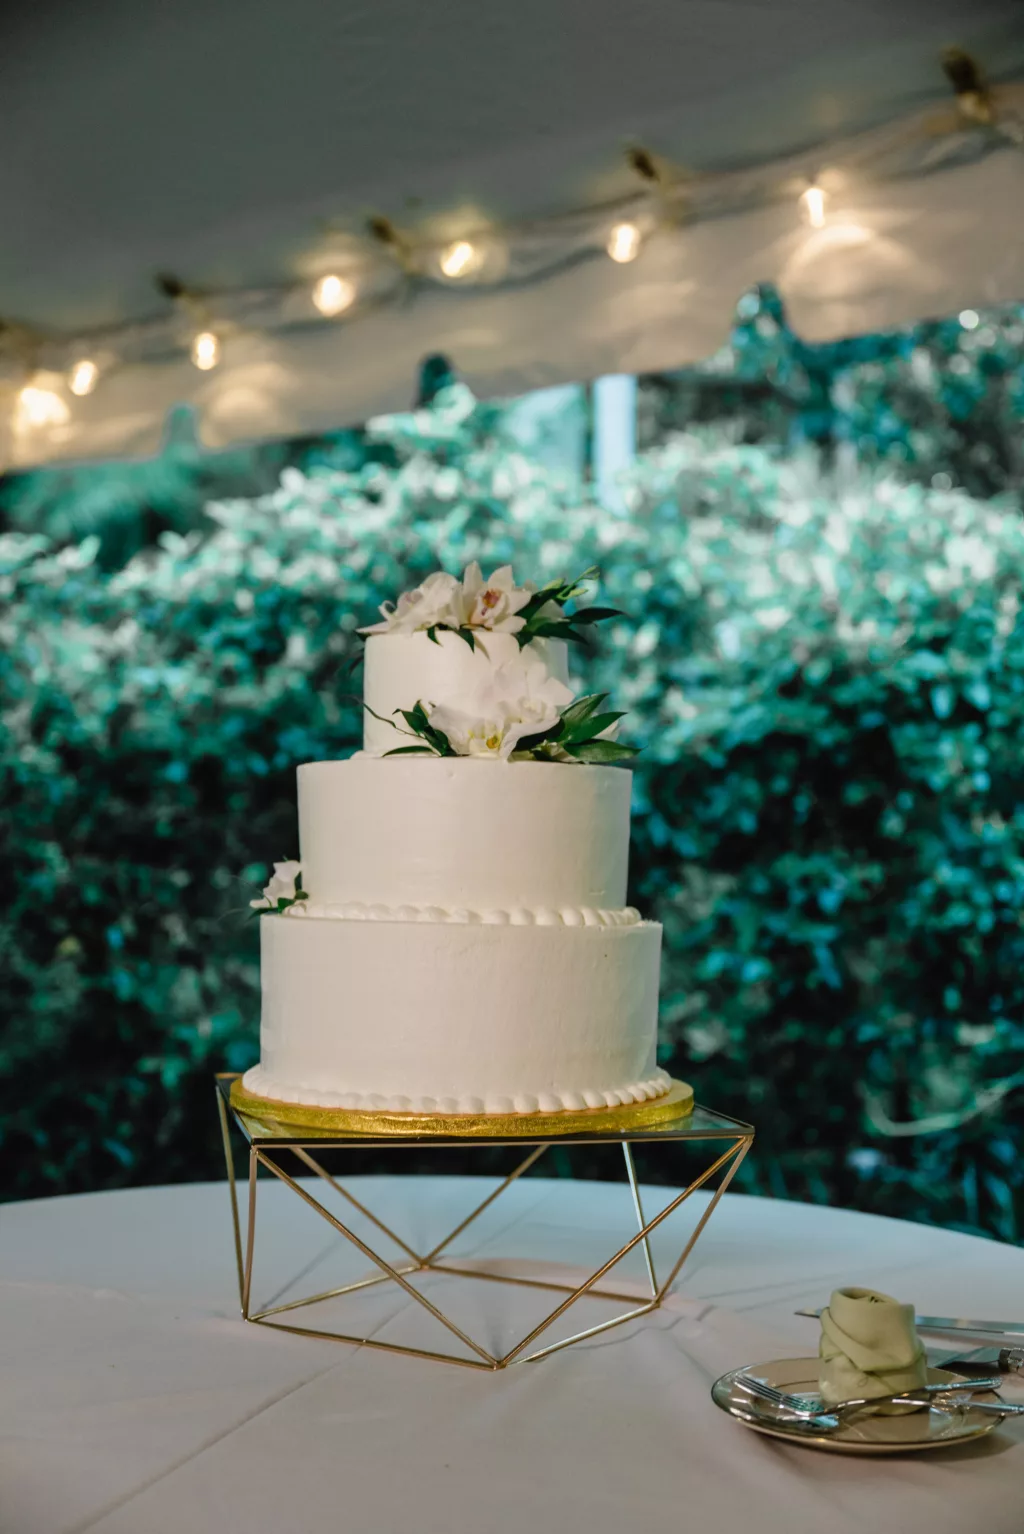 Classic Round Three-Tiered Buttercream Wedding Cake with White Orchid Accents | Gold Geometric Cake Stand Ideas